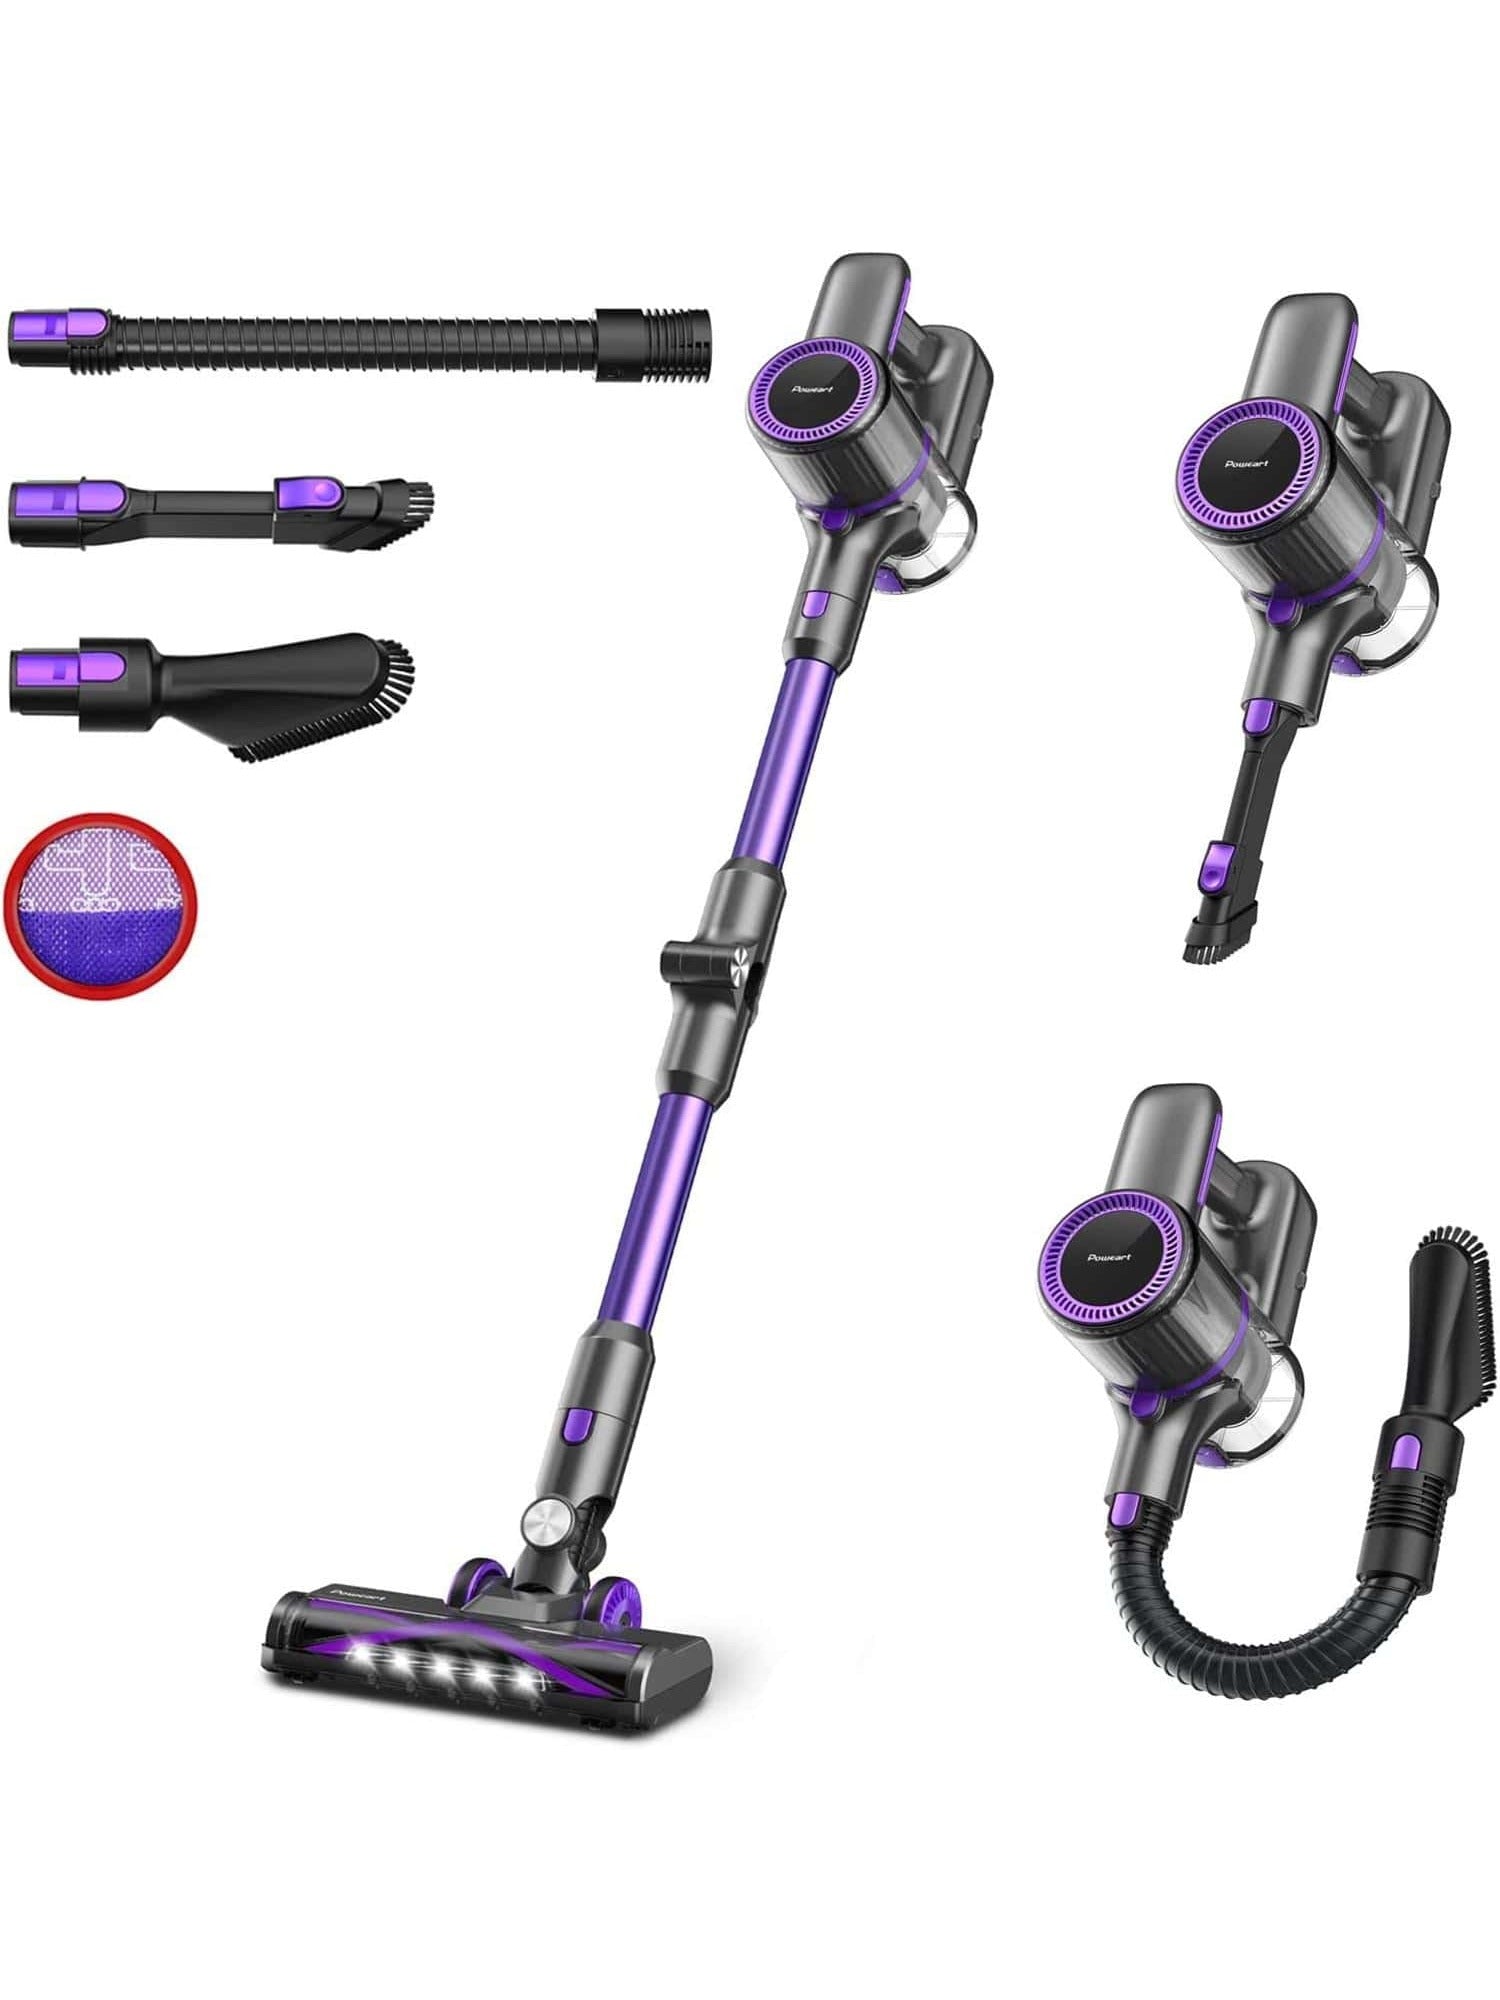 POWEART Cordless Vacuum Cleaner with 30Kpa Powerful Suction, 350W Rechargeable Vacuum Cleaner with 8-Cell 2600mAh Battery, 8-in-1 Cordless Stick Vacuum for Hard Floor Carpet Pet Hair